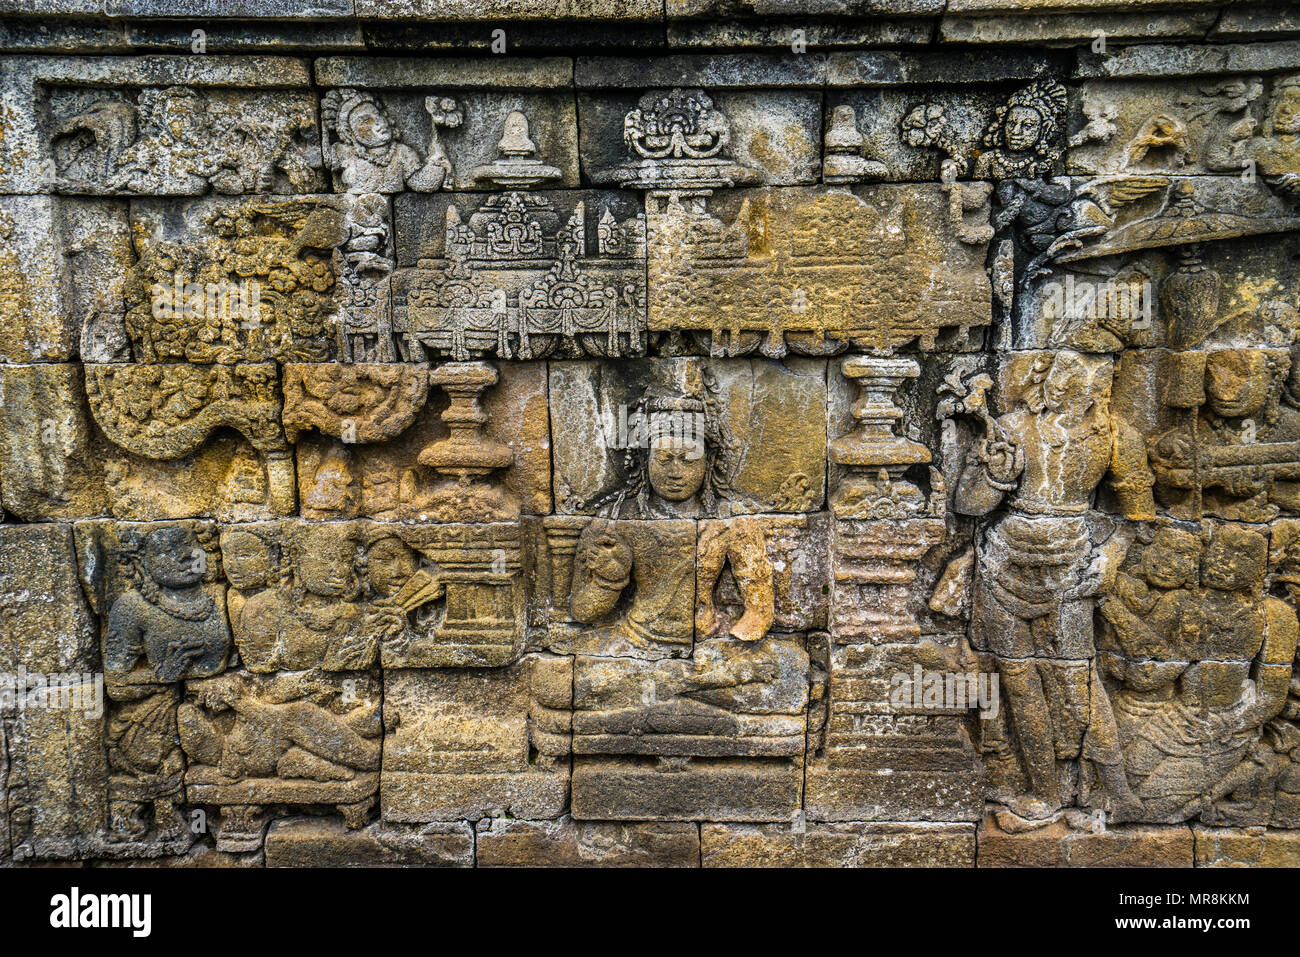 stock - Alamy images hi-res relief and Borobudur photography gallery